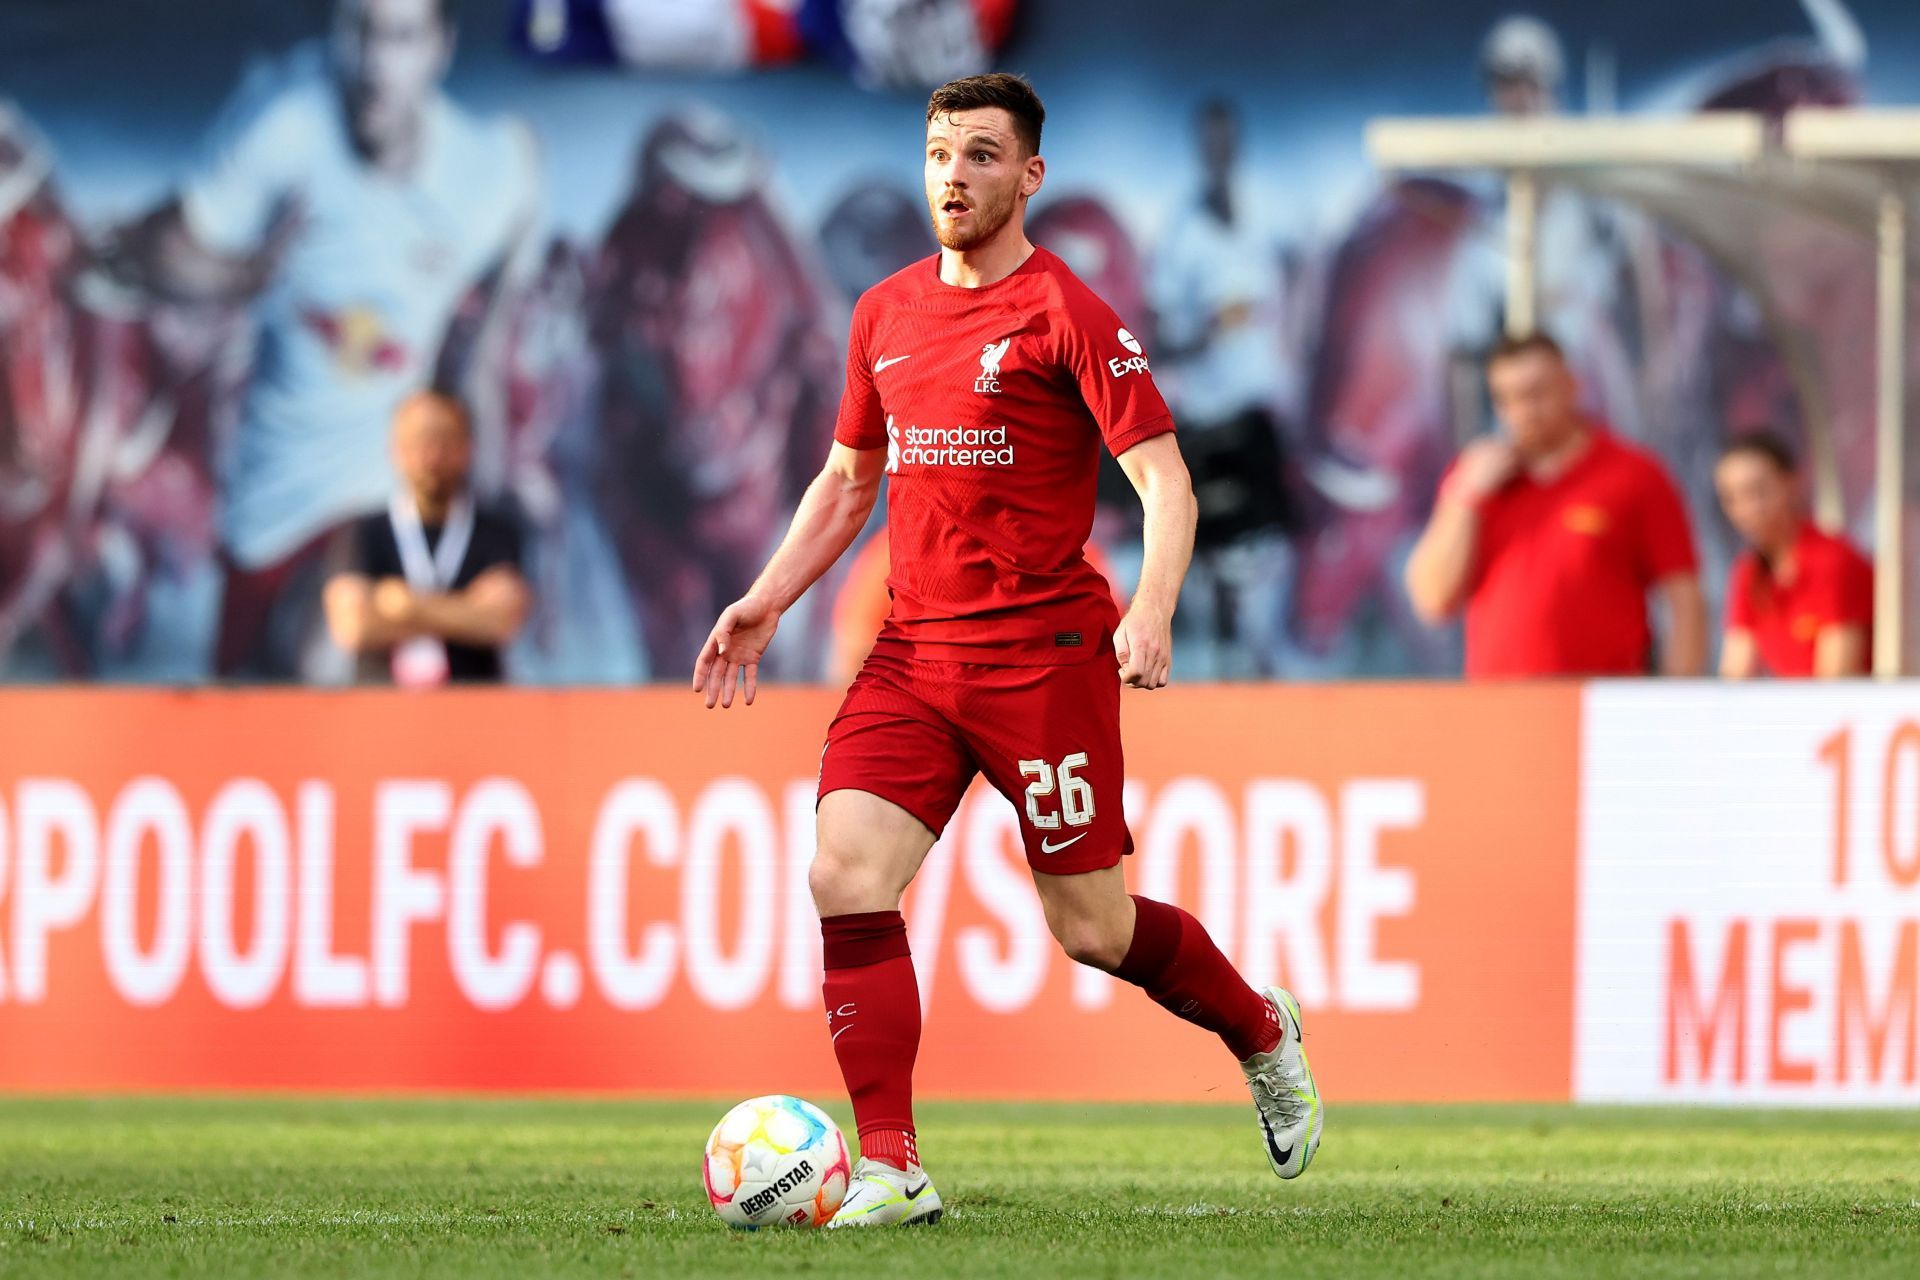 Andy Robertson overcame the situation to keep his career in flying shape